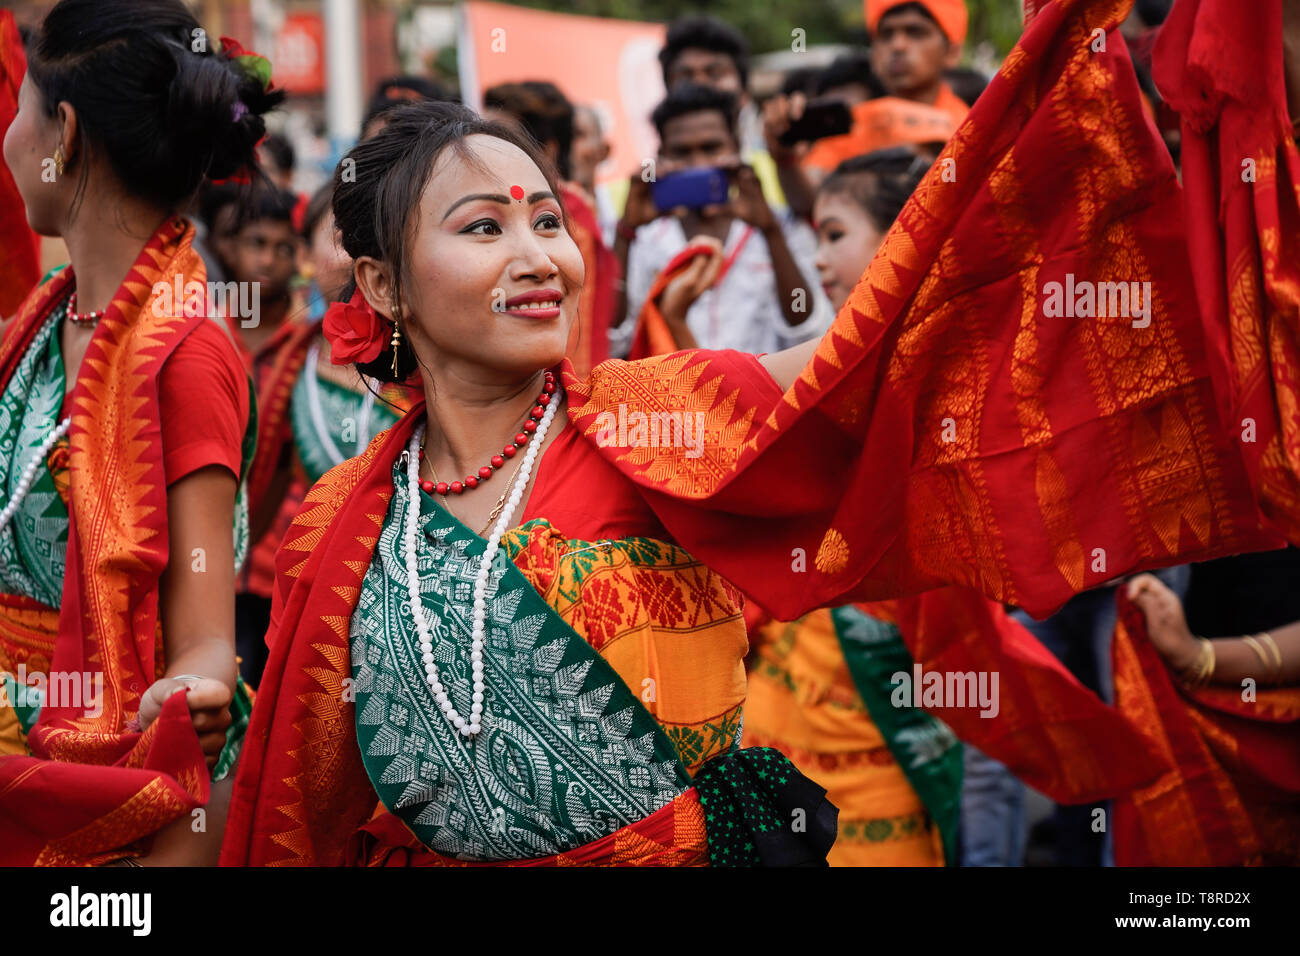 A performer seen dressed in traditional costumes during the Show in Kolkata. Bharatiya Janata Party (BJP) president Amit Shah on Tuesday held a mega roadshow in Kolkata with support of party's candidates ahead of the final phase of Lok Sabha polls. Stock Photo